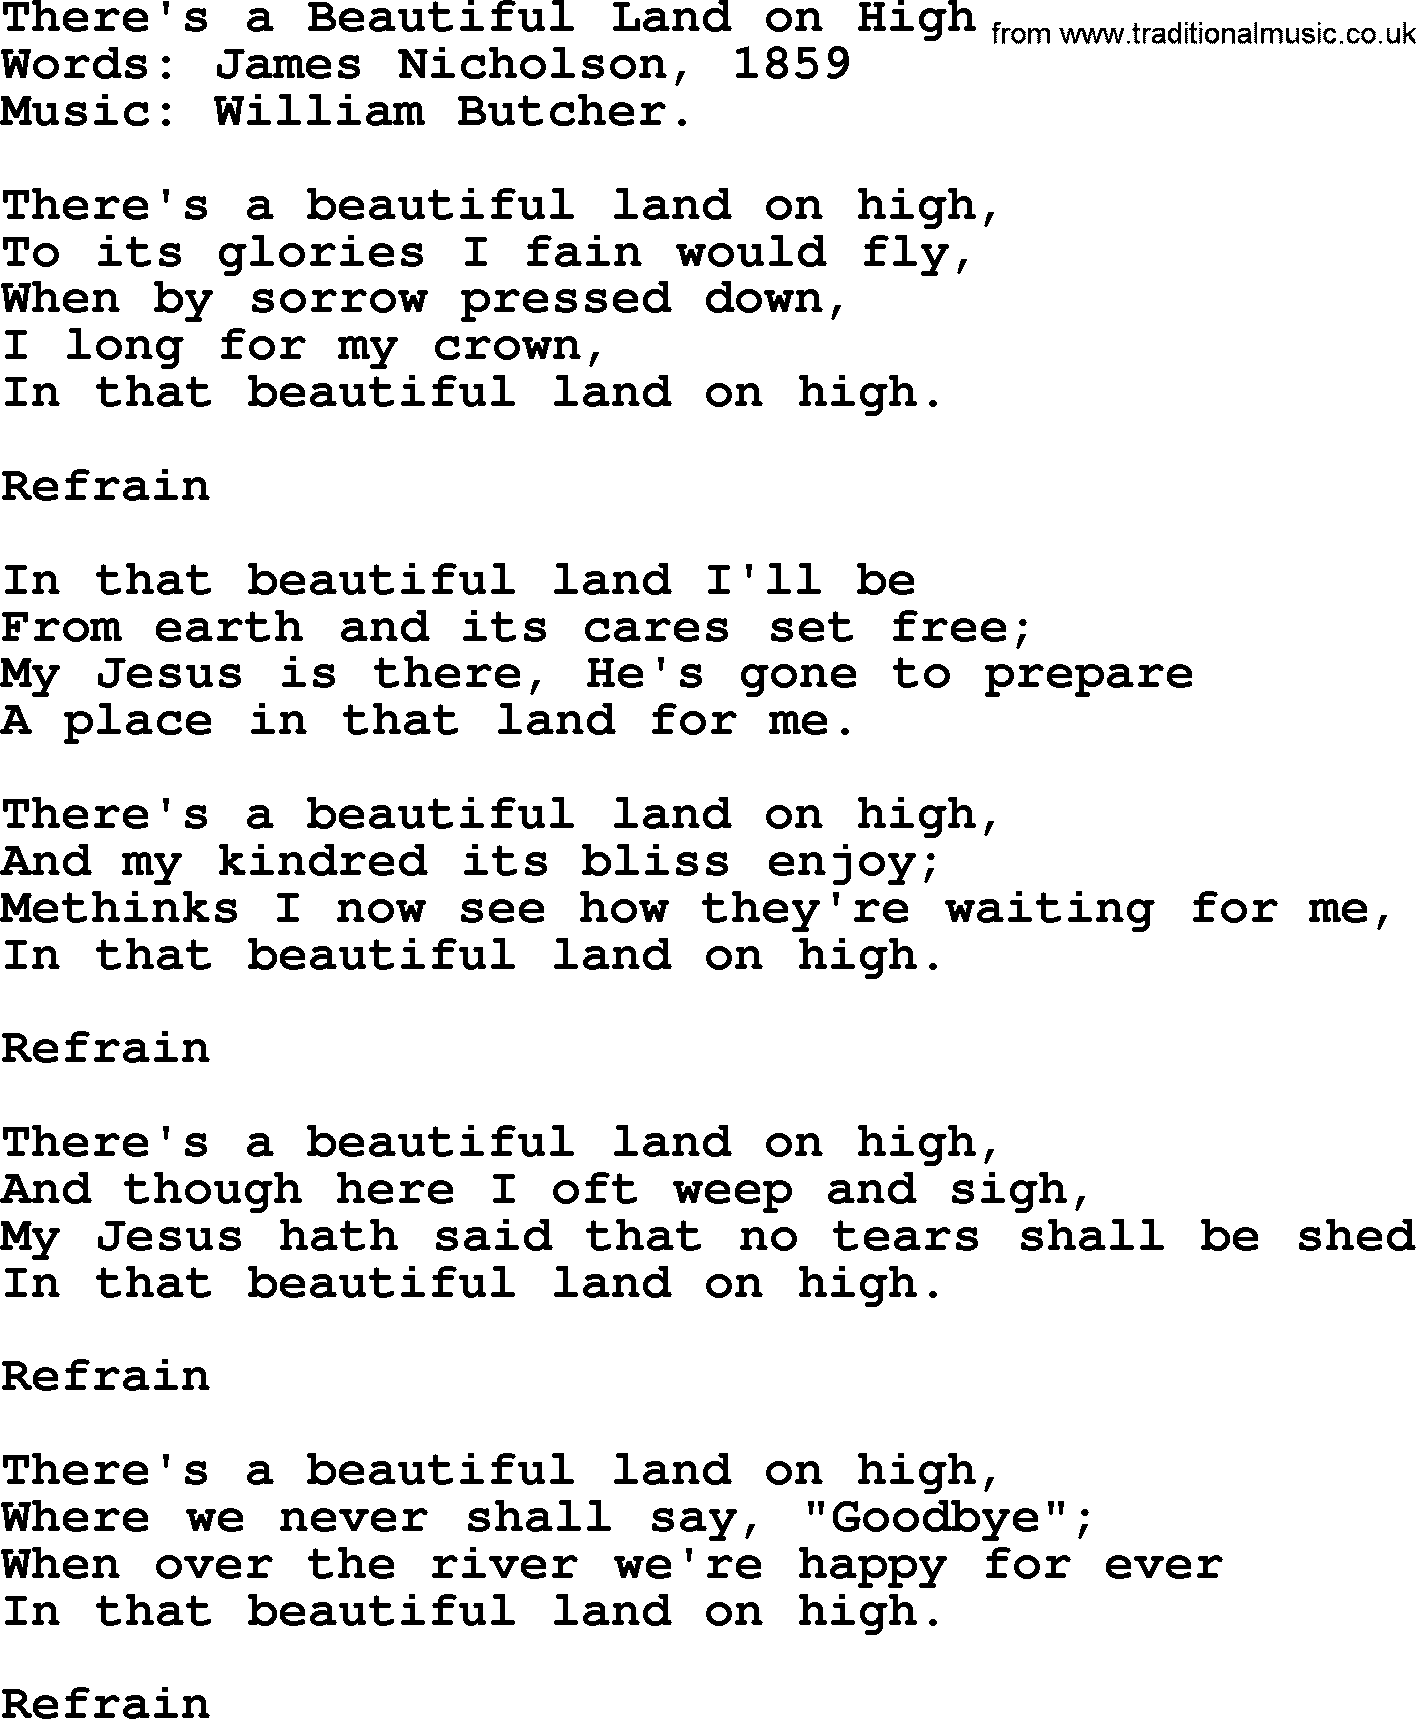 Songs and Hymns about Heaven: There's A Beautiful Land On High lyrics with PDF